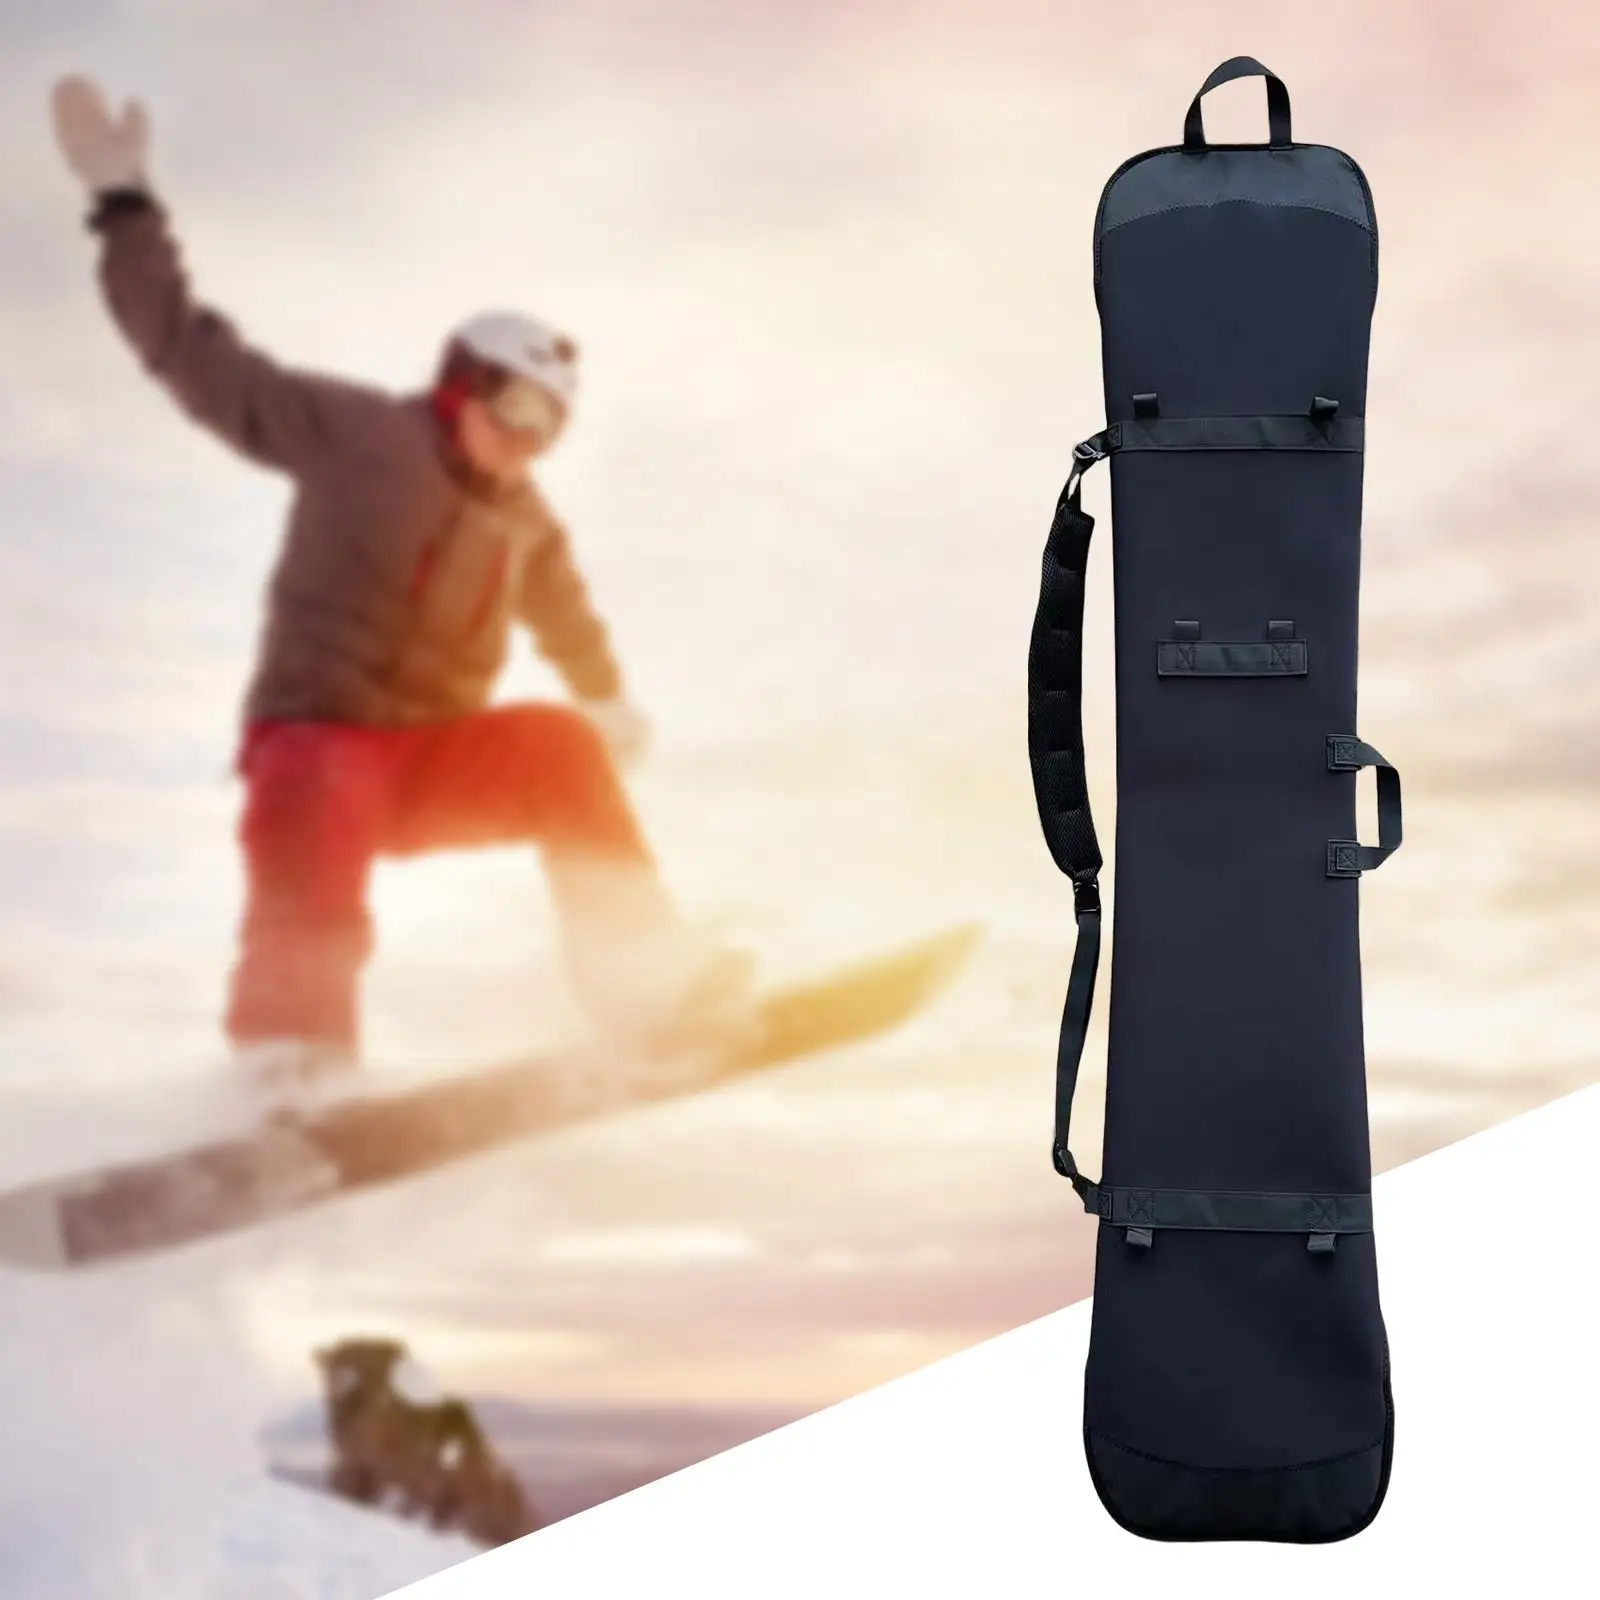 

Protection Premium Sleeve Carry 153cm Equipment Luggage Snowboard Travel Bag Ski Storage Case for Traveling Winter Longboard